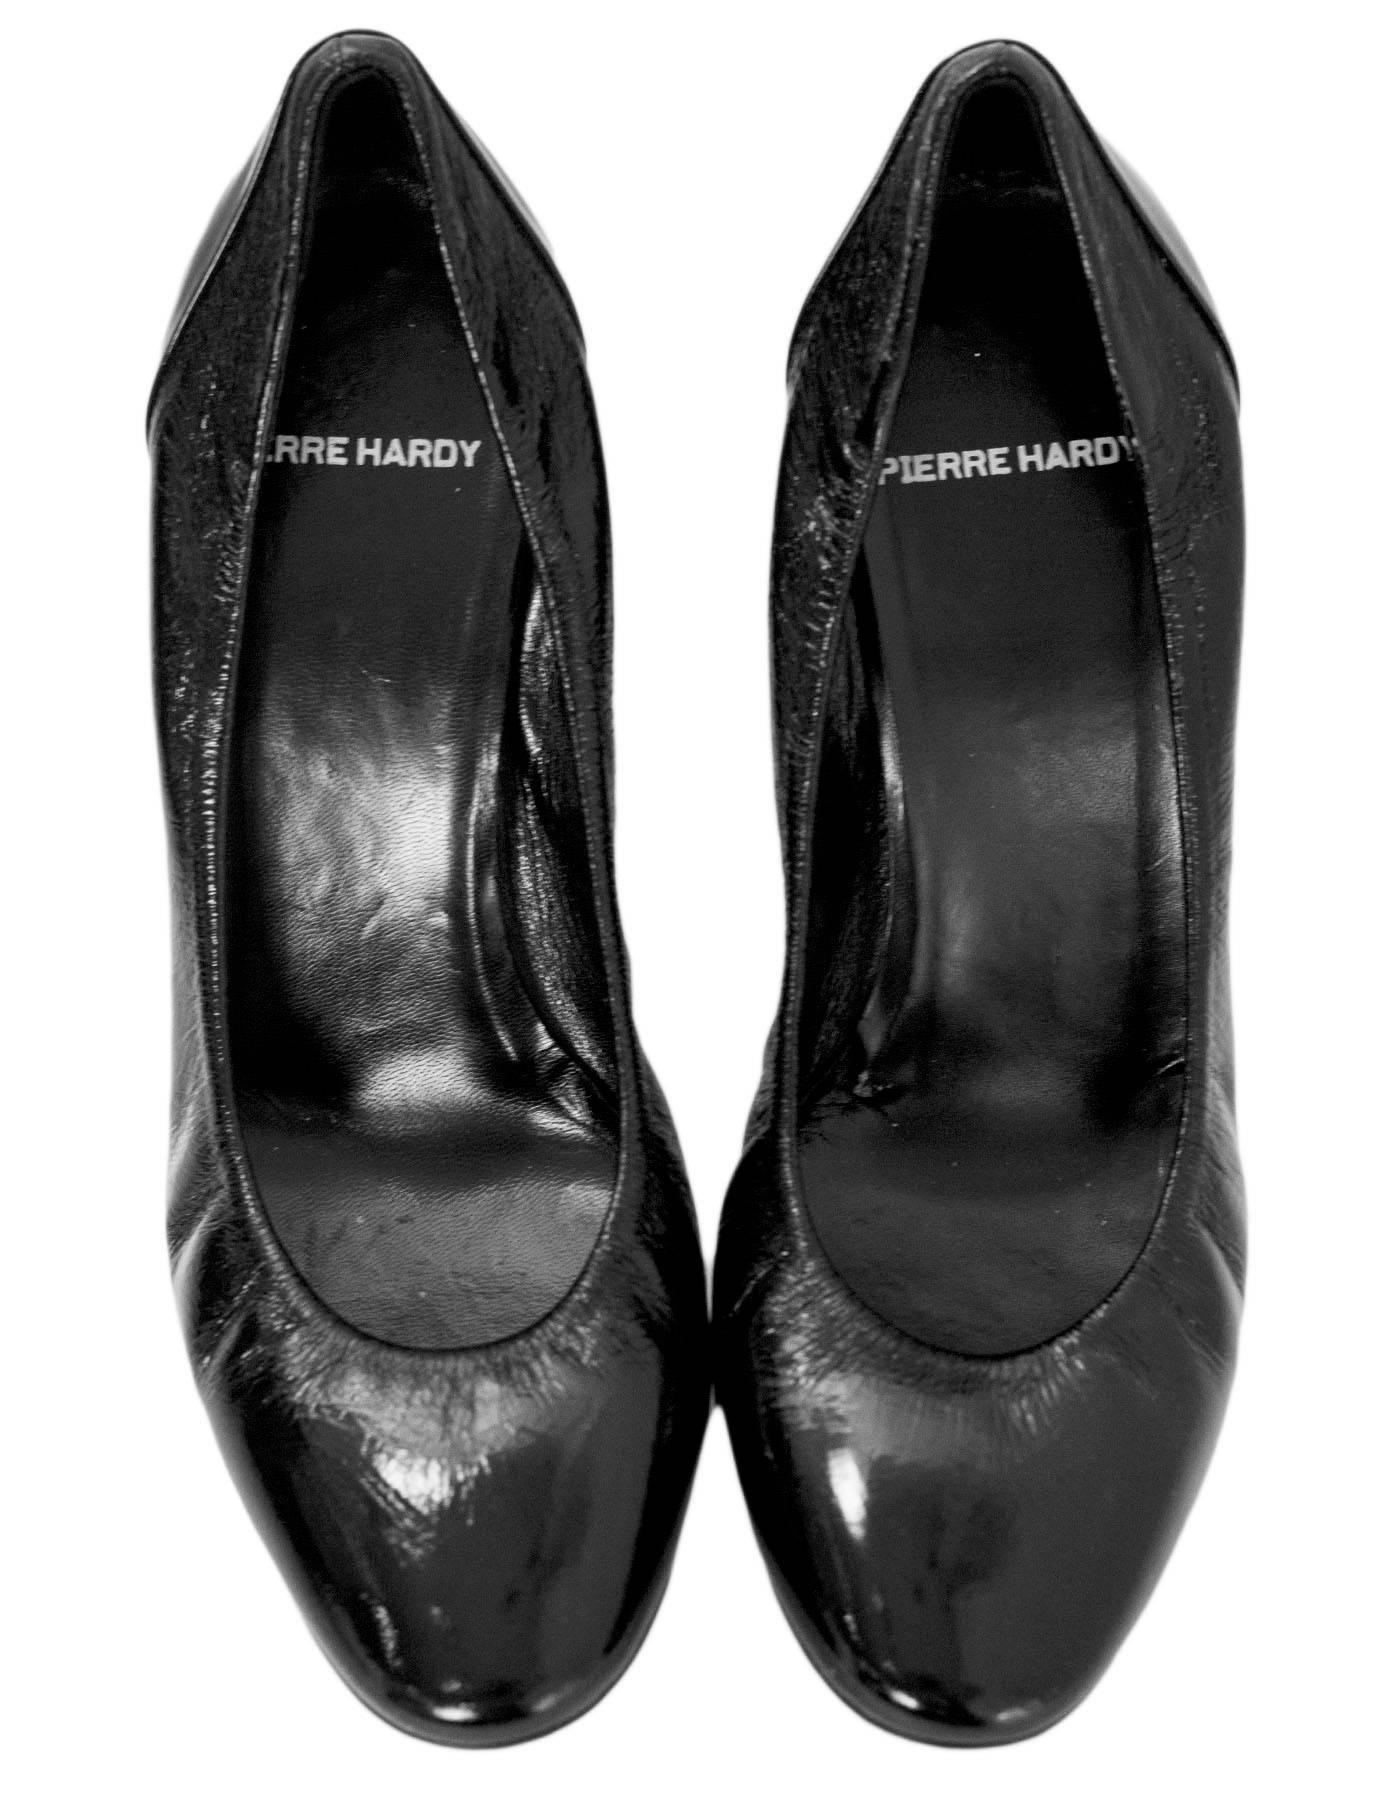 Pierre Hardy Black Patent Leather Pumps Sz 37.5 with Box In Excellent Condition In New York, NY